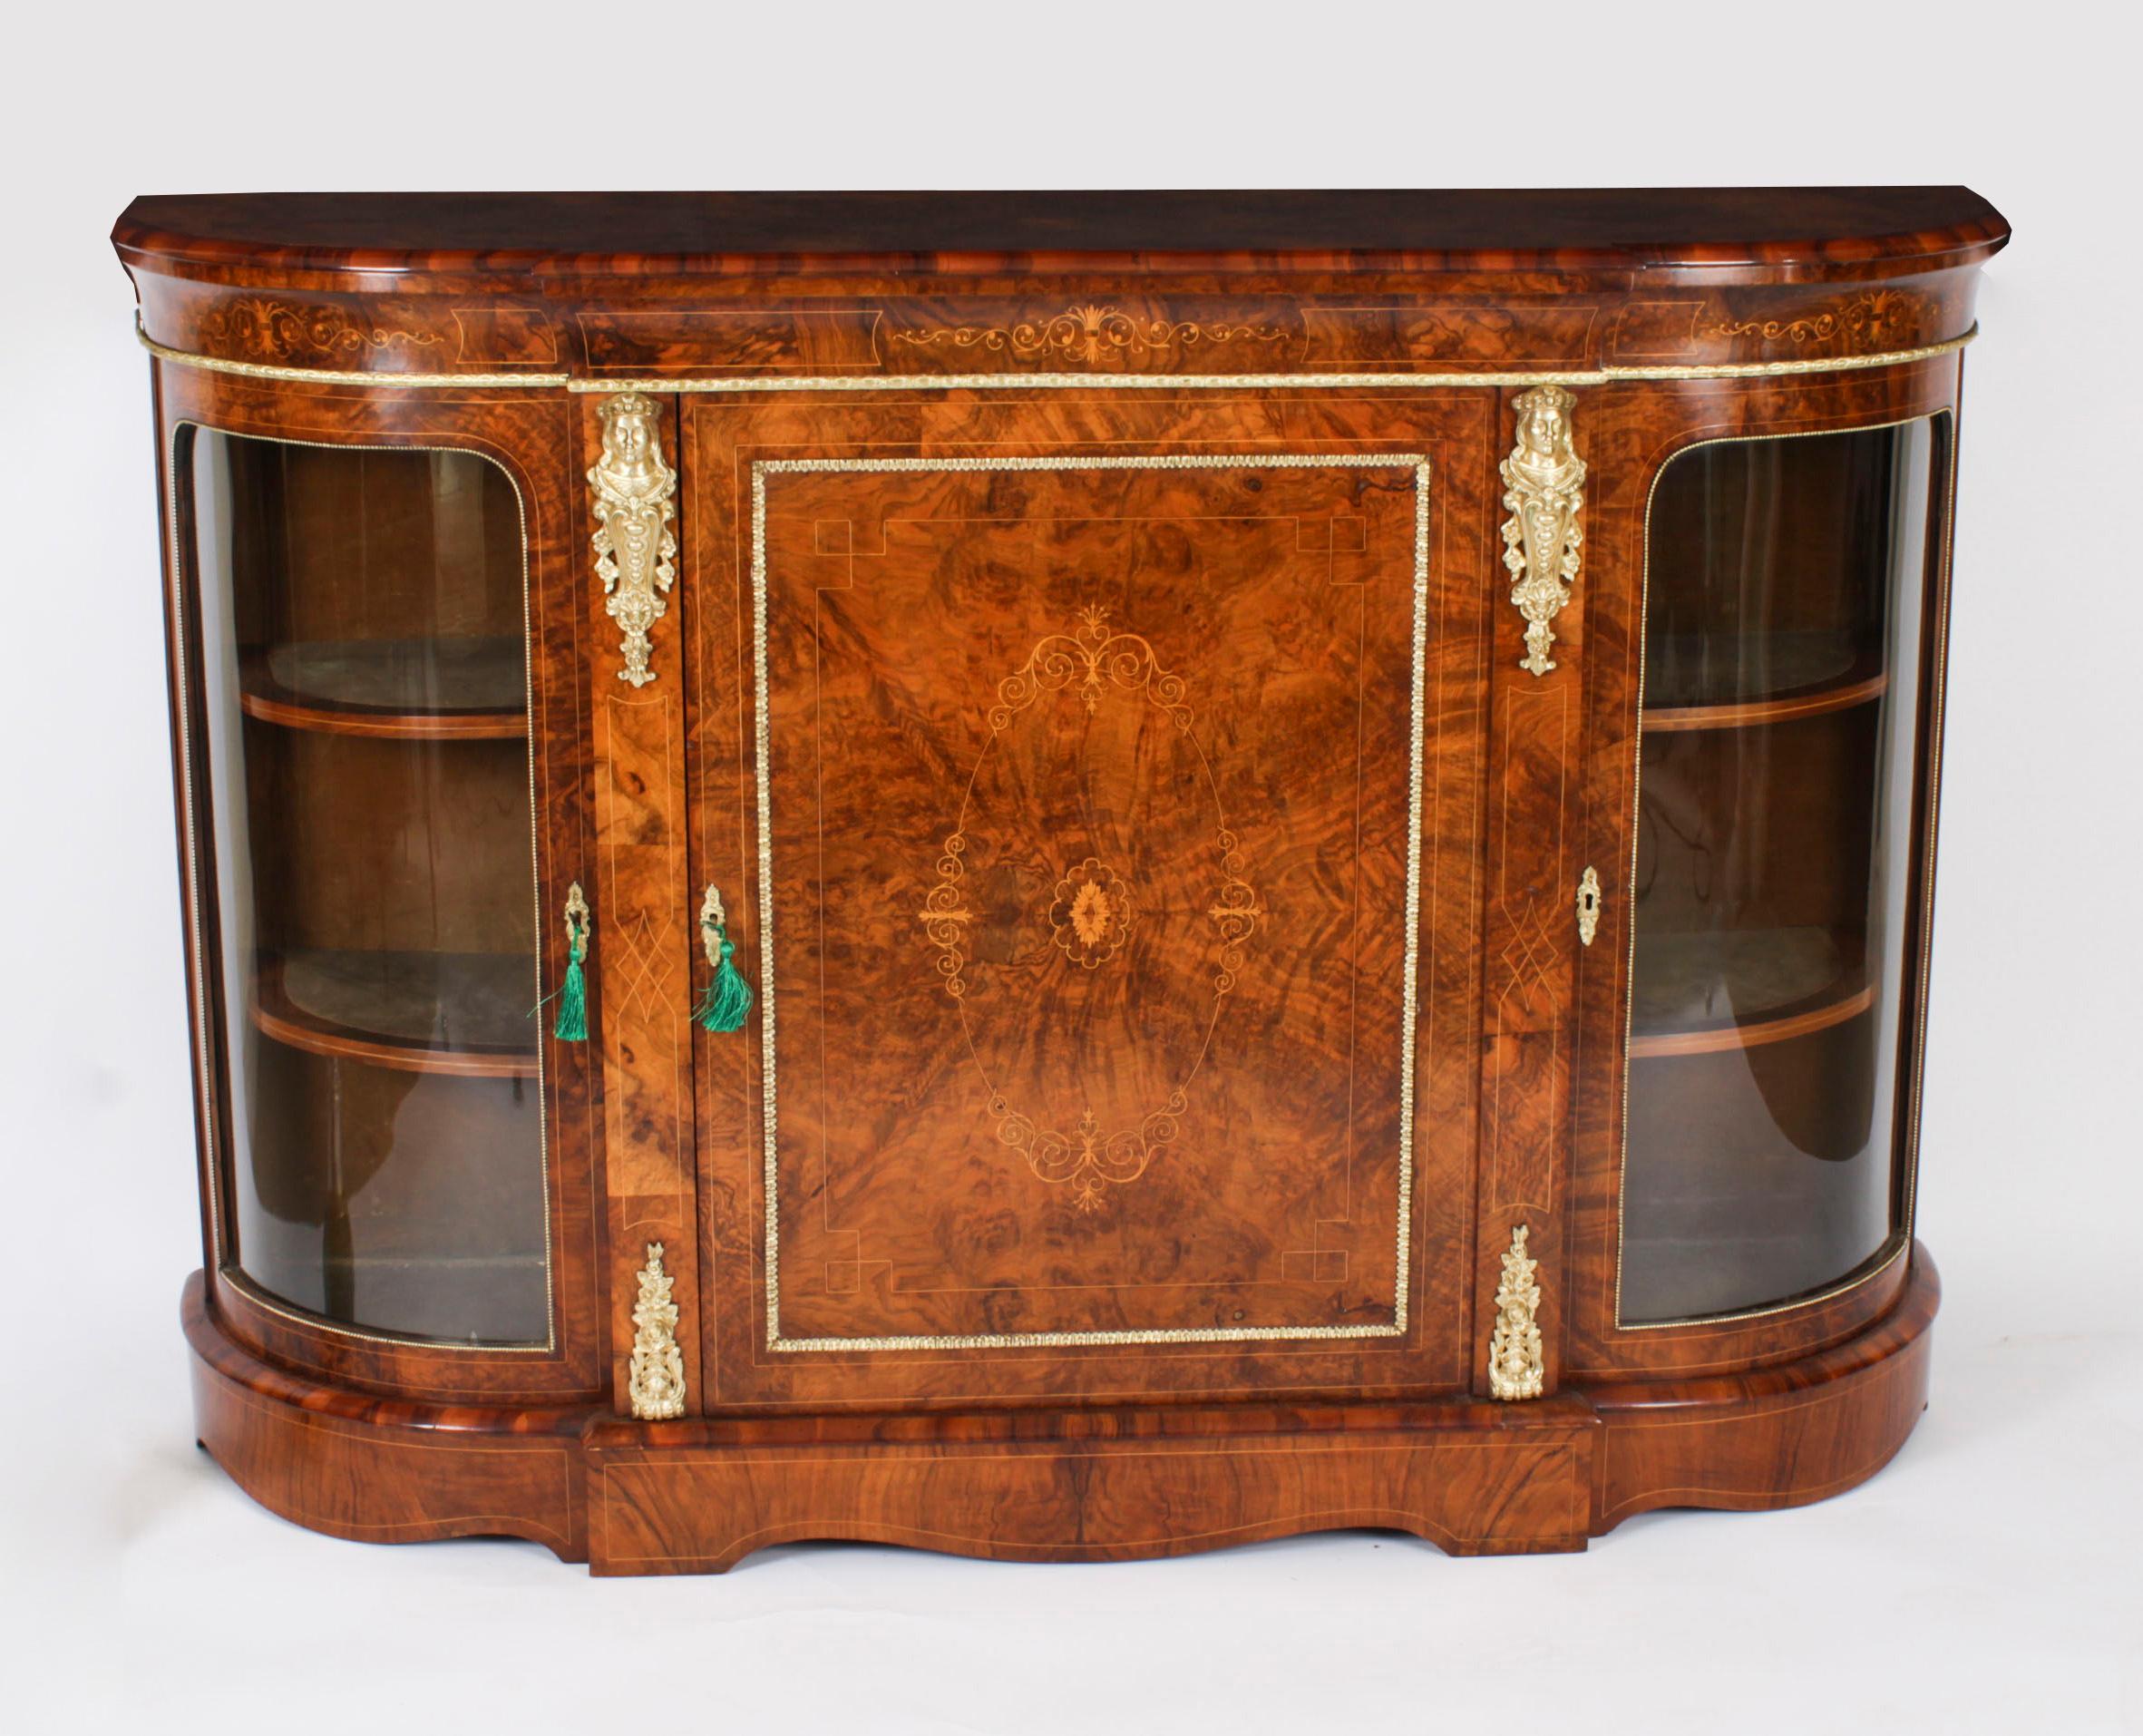 This is a superb antique Victorian burr walnut inlaid and ormolu mounted credenza, circa 1860 in date

Oozing sophistication and charm, this credenza is the absolute epitome of Victorian high society. Its attention to detail and lavish decoration